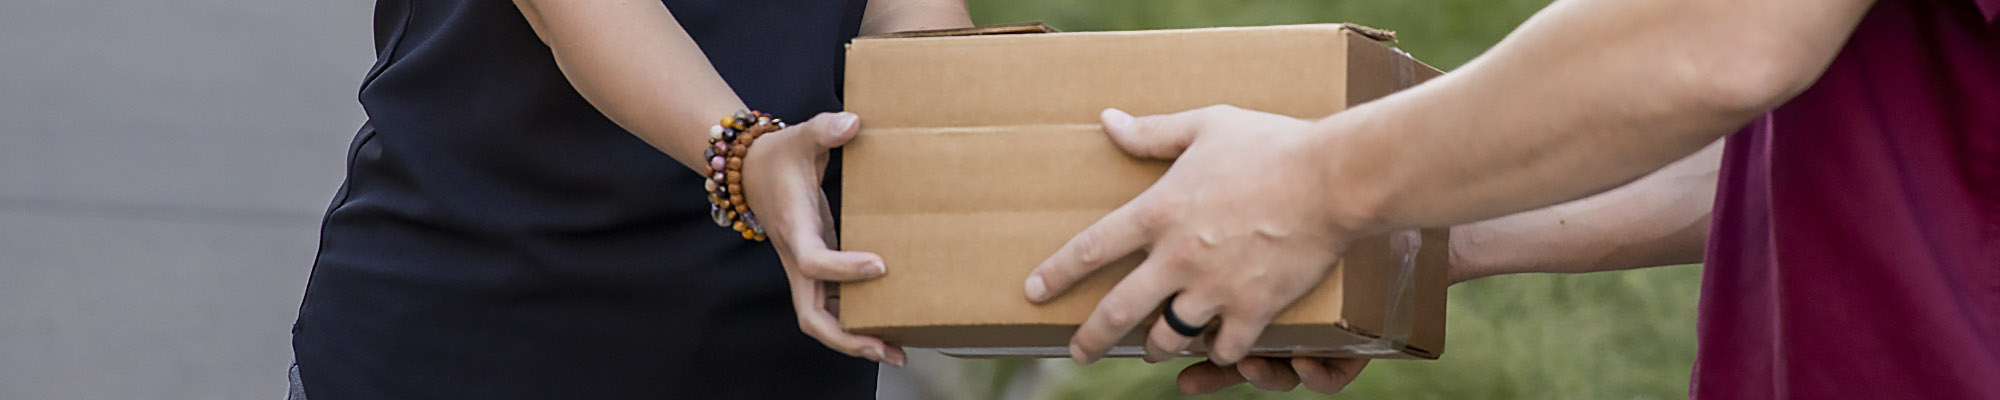 Close-up of a person handing off a package to someone else